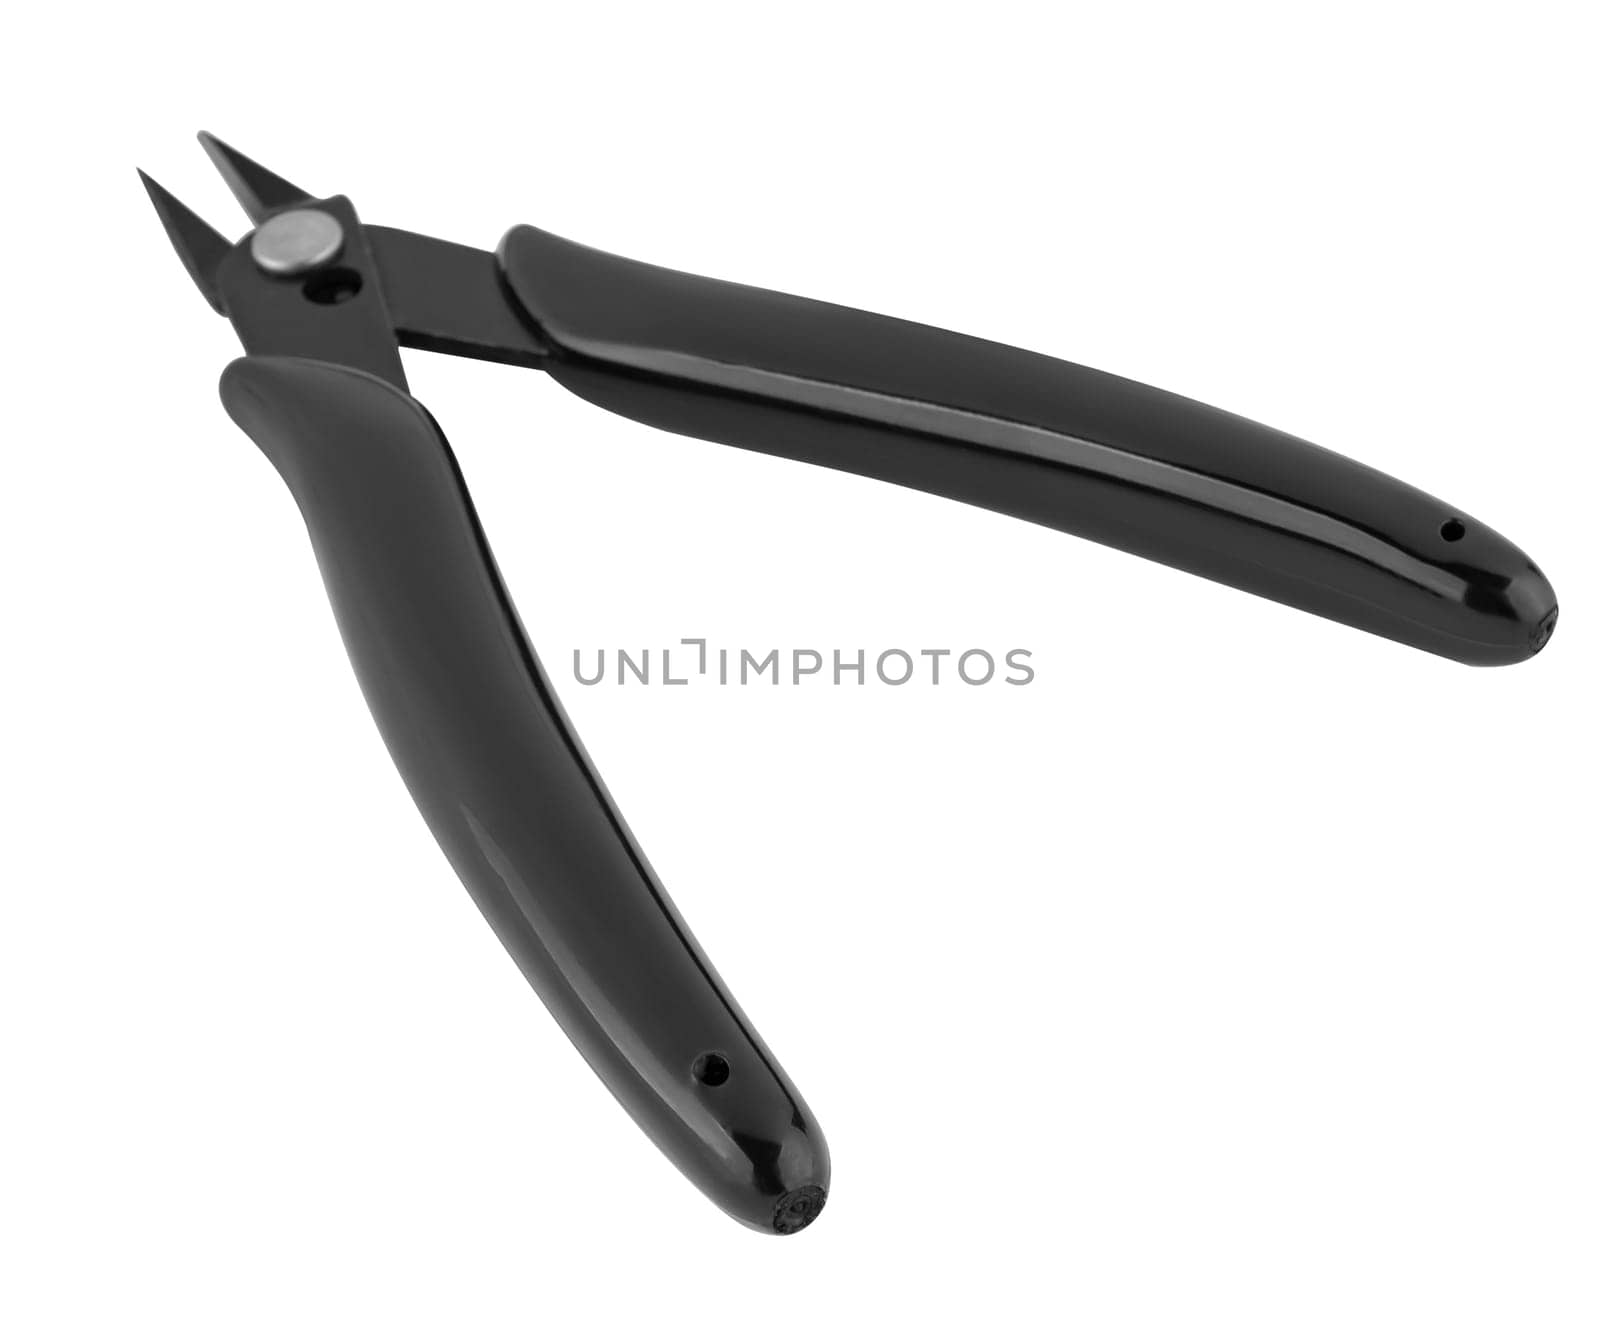 Wire cutting wire cutters on white background